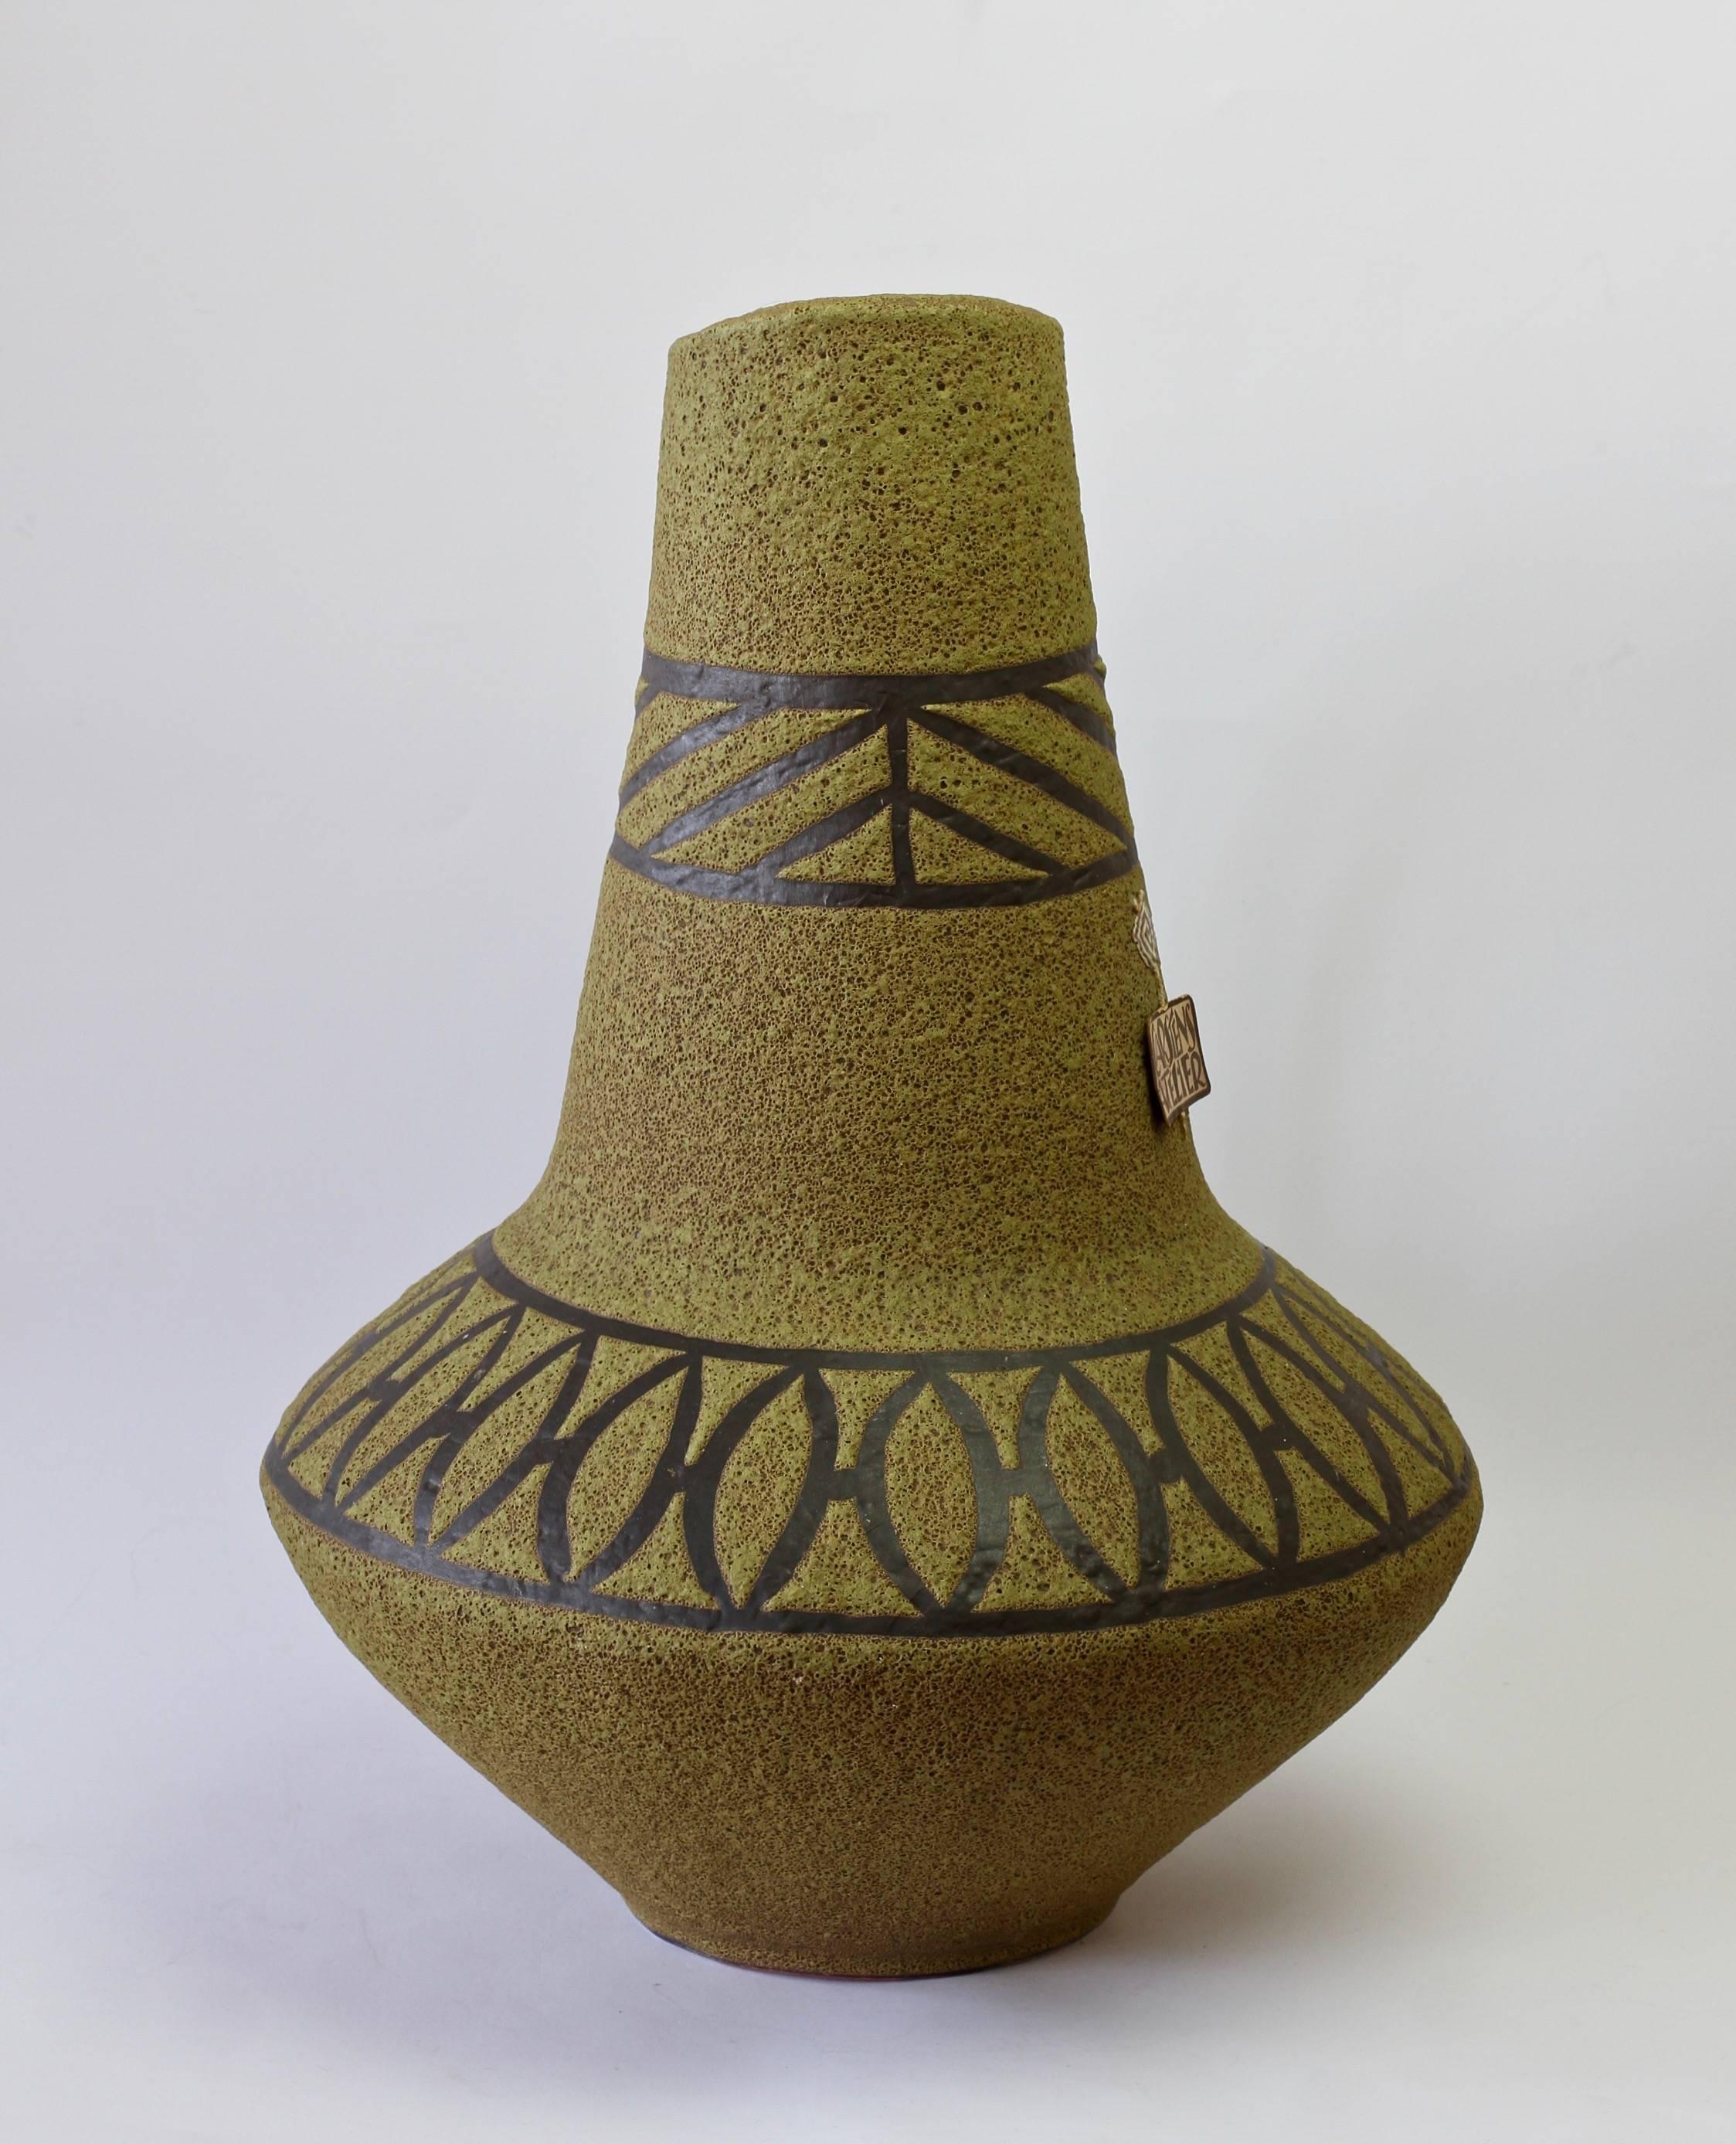 Clay 1970s Large Green Lava Glazed West German Pottery Floor Vase by Carstens Atelier For Sale